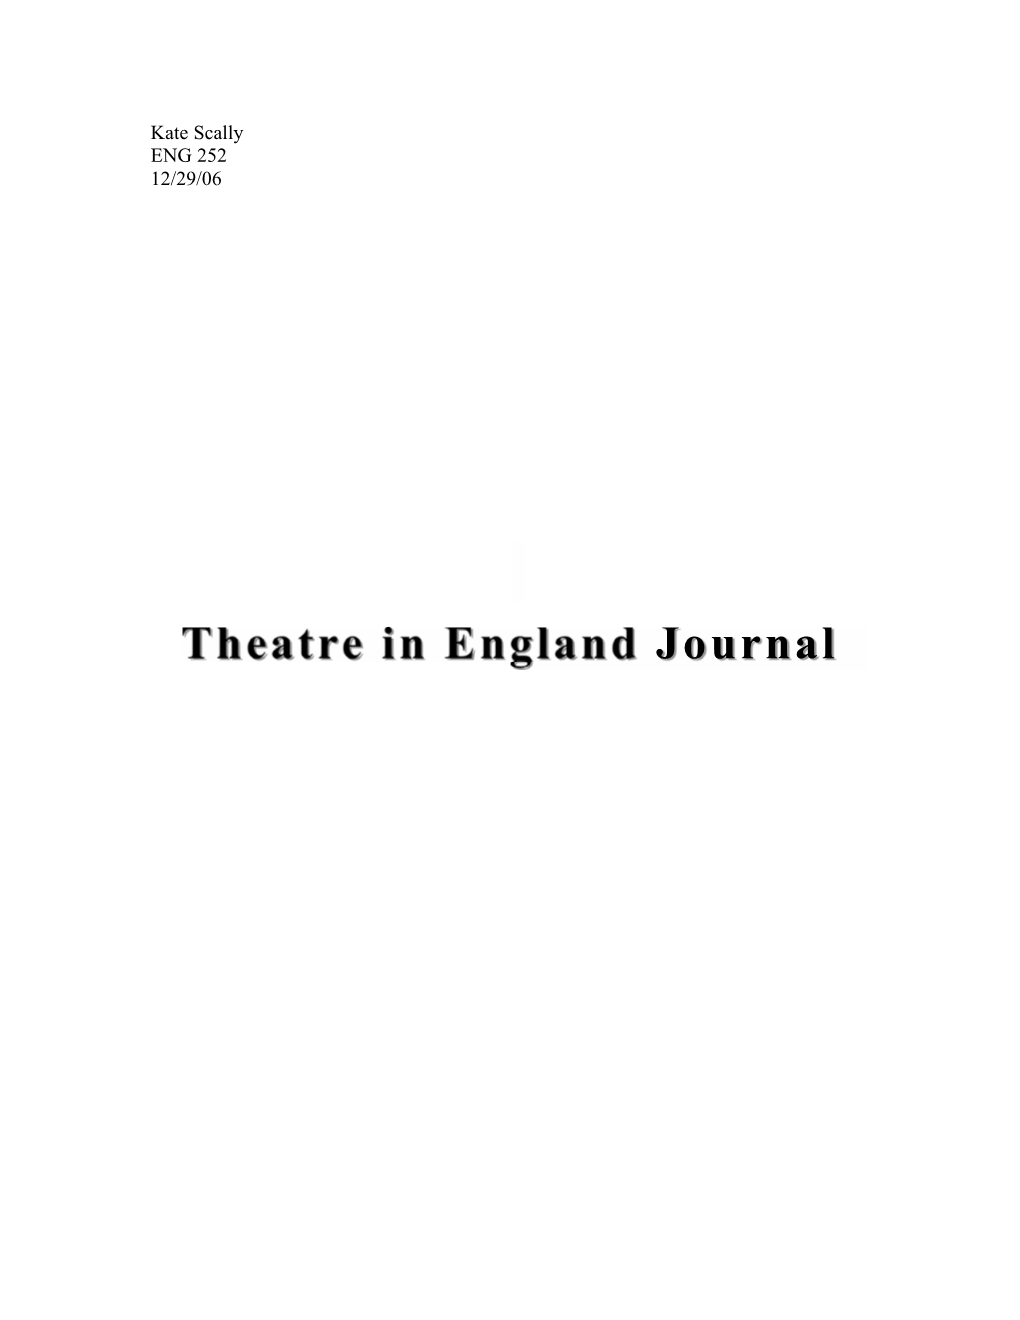 Theatre in England Journal 2